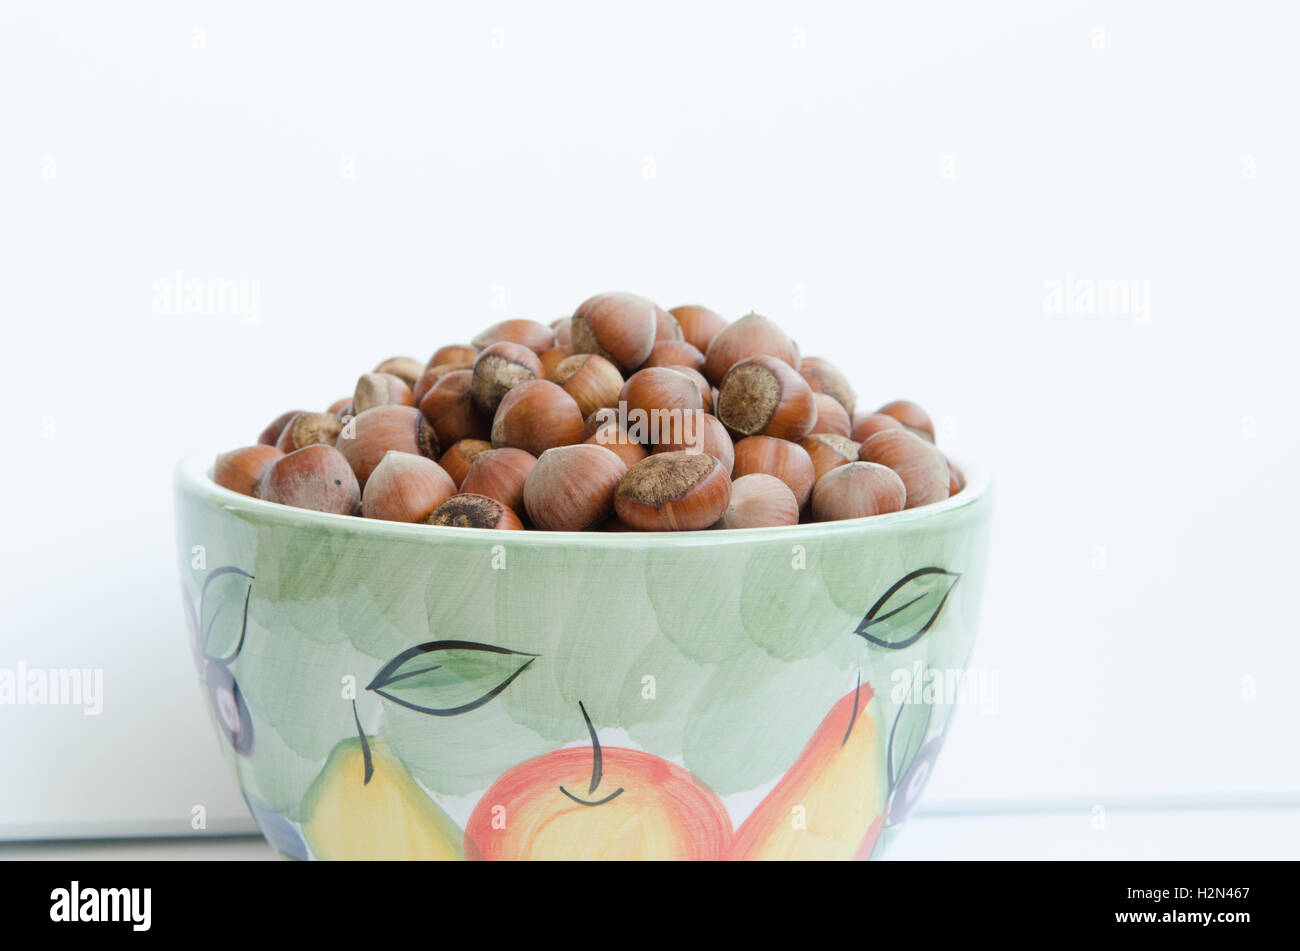 bowl of unshelled hazel nuts isolated against a white background Stock Photo